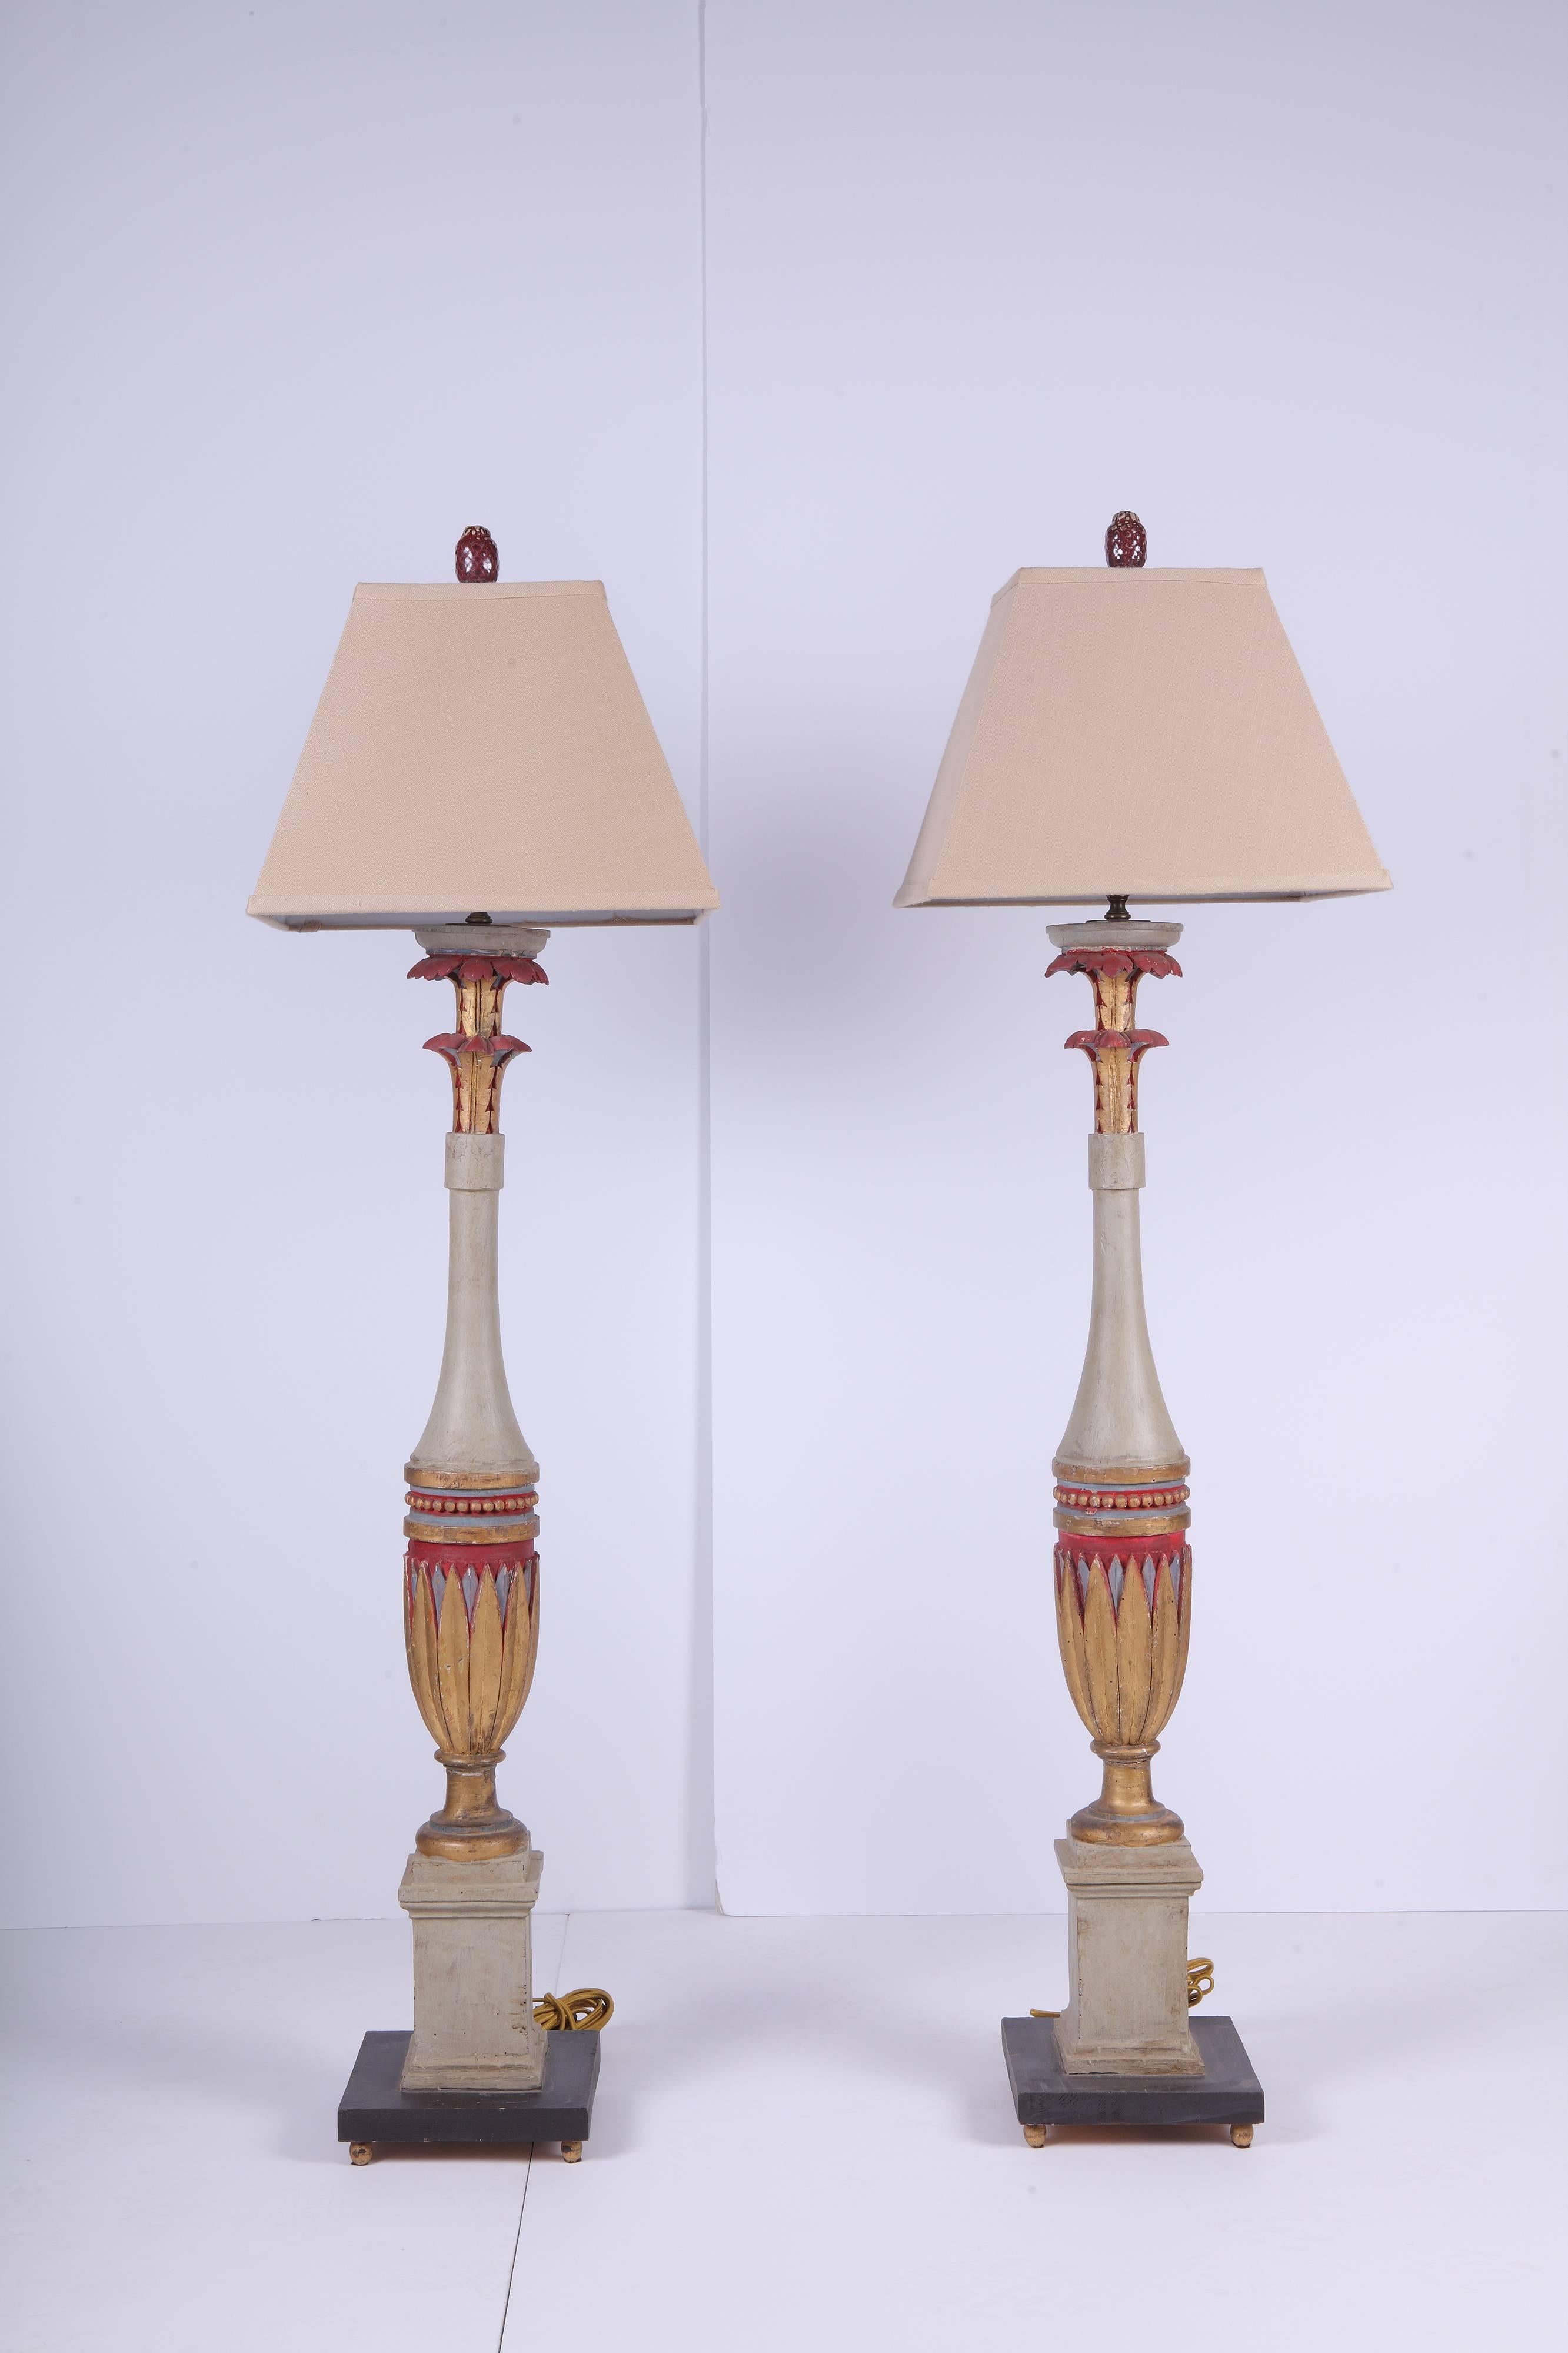 Pair of tall handsomely carved lamps with a wonderful Art Deco design painted in a cinnabar color with gilding at the top. Later black bases and gold bun feet. Good condition with normal wear for this age. New cinnabar colored ceramic finials. Very